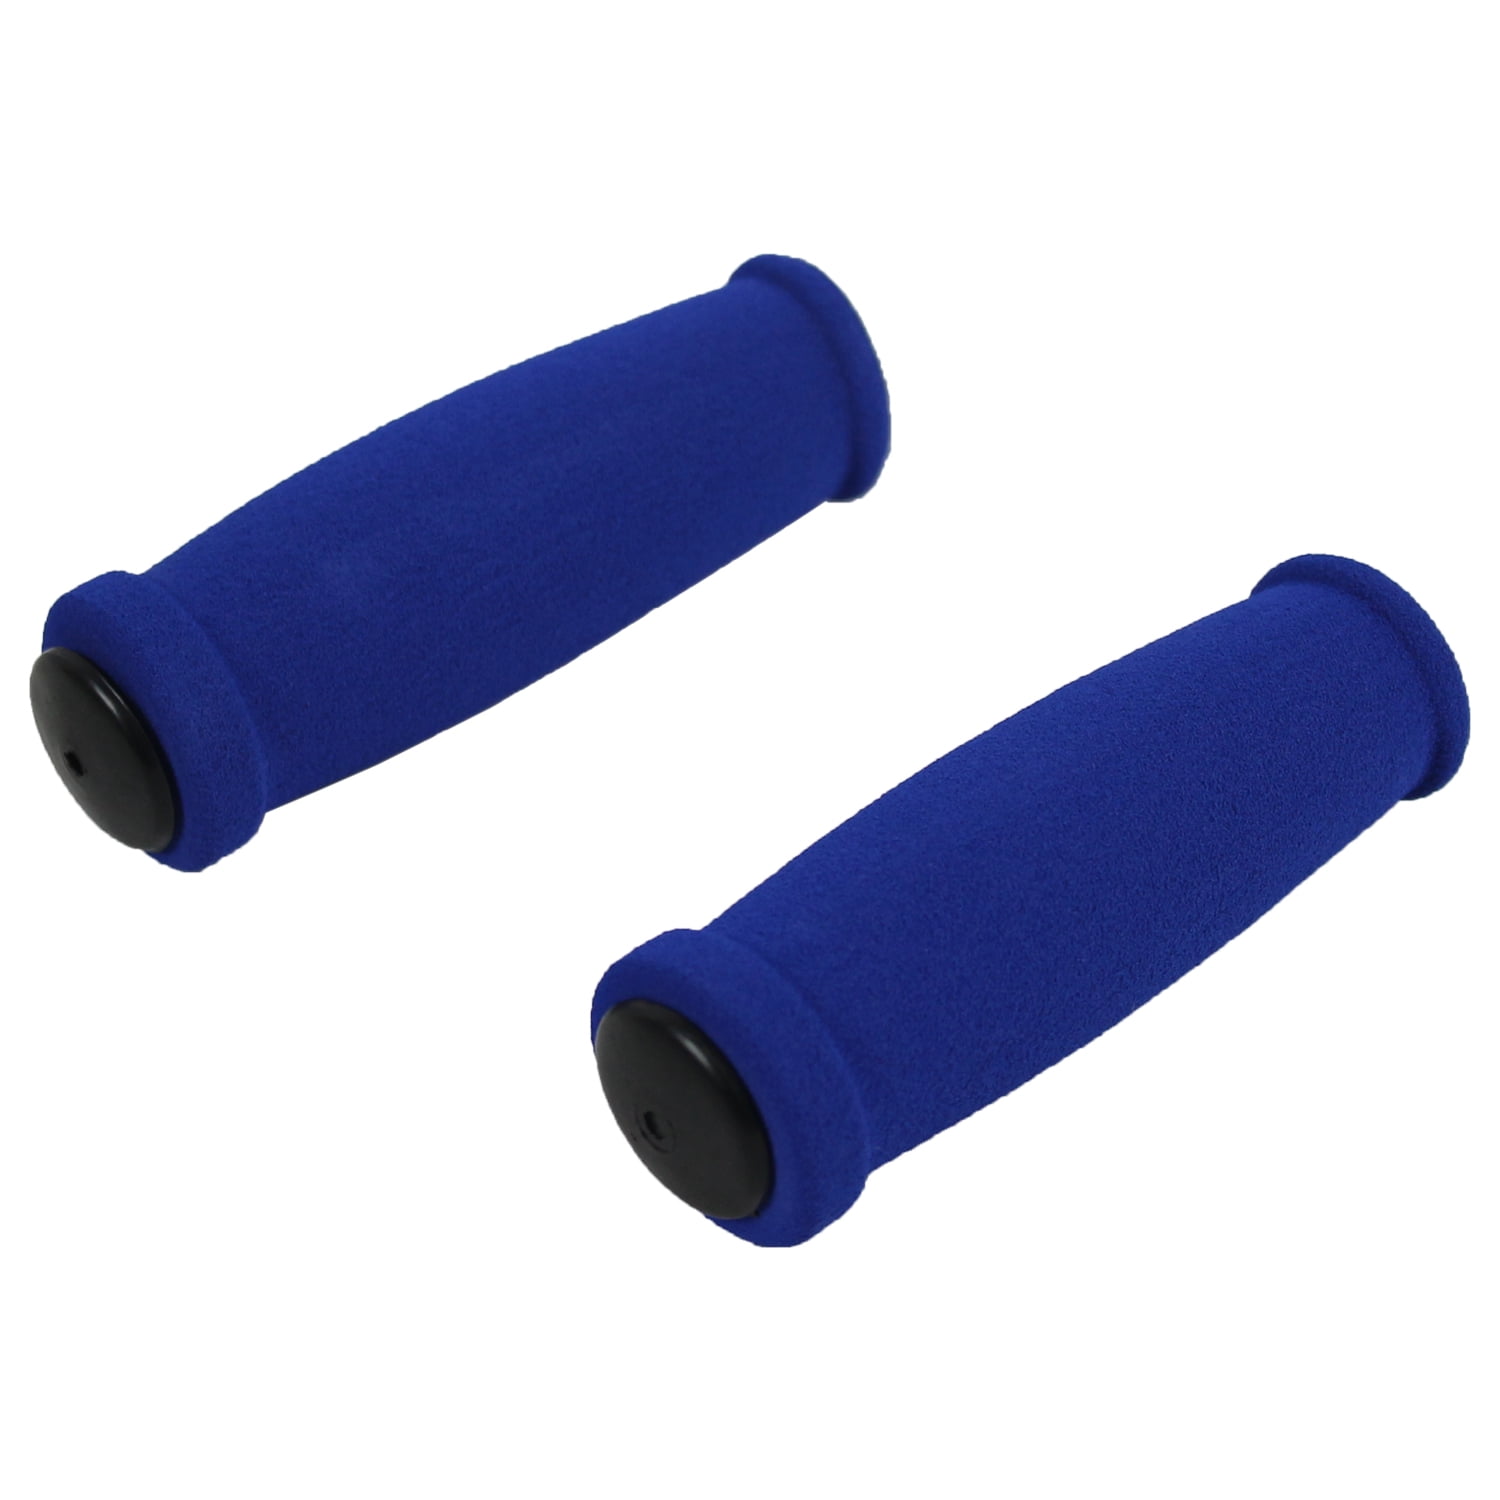 BLUE Foam Replacement Hand Grips & Handle Bar Bell for Bicycle Scooter or Razor